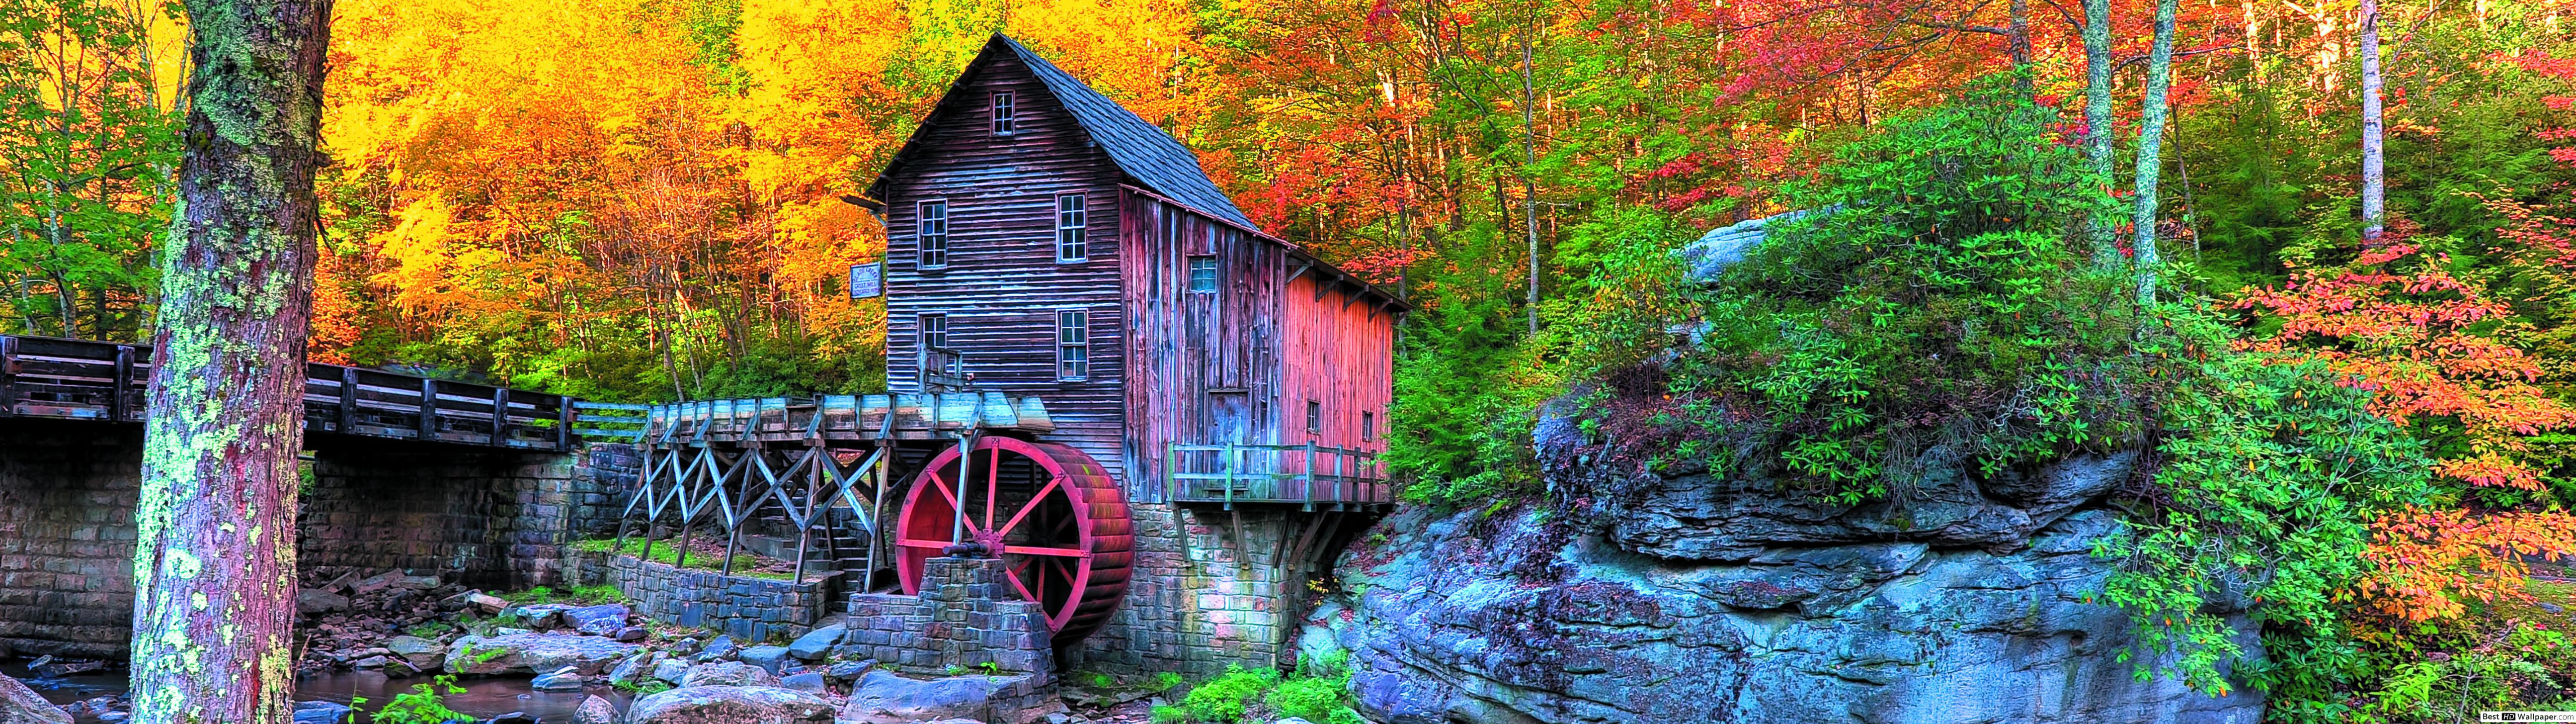 Grist Mill in Autumn HD wallpaper download